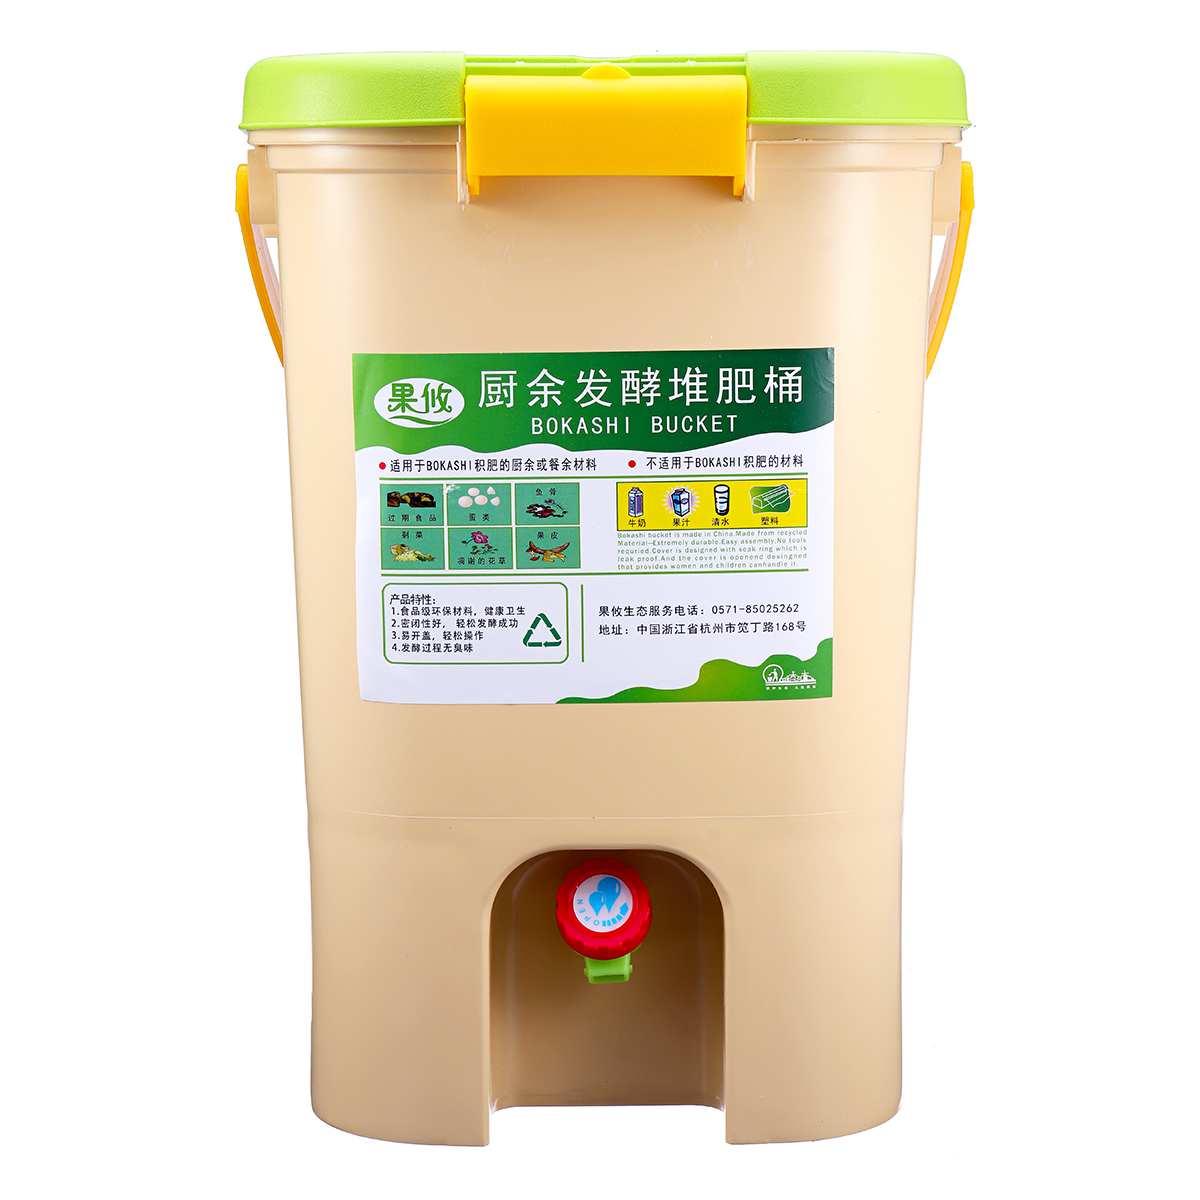 Compost Bin Recycle Composter Aerated Compost Bin Organic Homemade Trash Can Bucket Kitchen Garden Homemade Food Waste Bins 21L